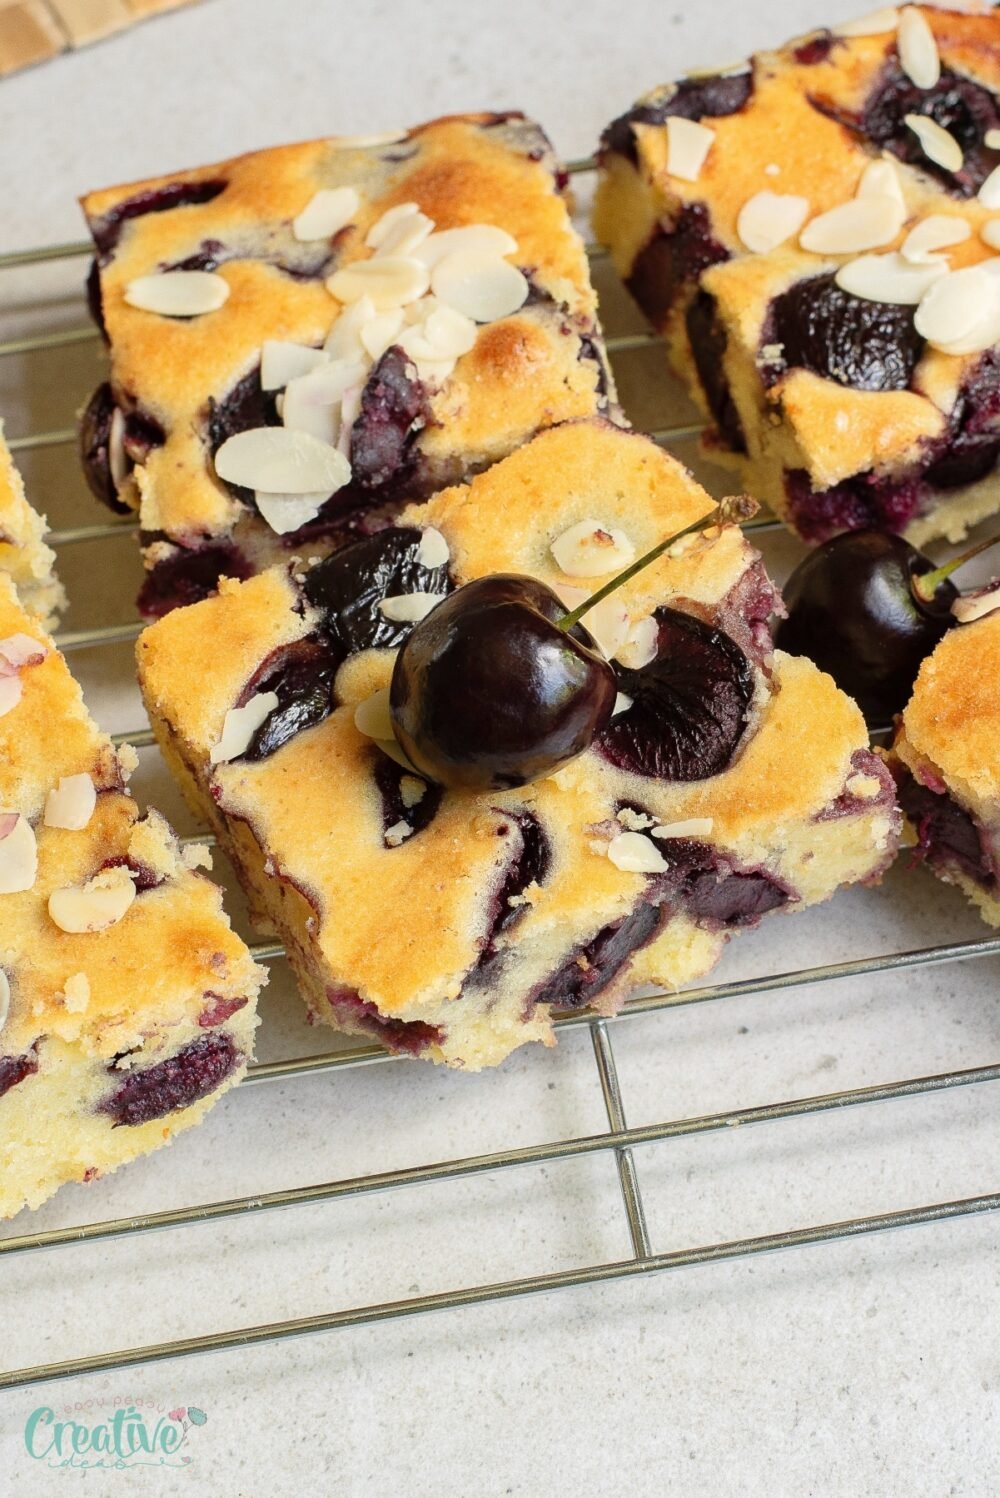 Experience the irresistible allure of easy cherry sheet cake, featuring cherries and almonds, that is sure to please.